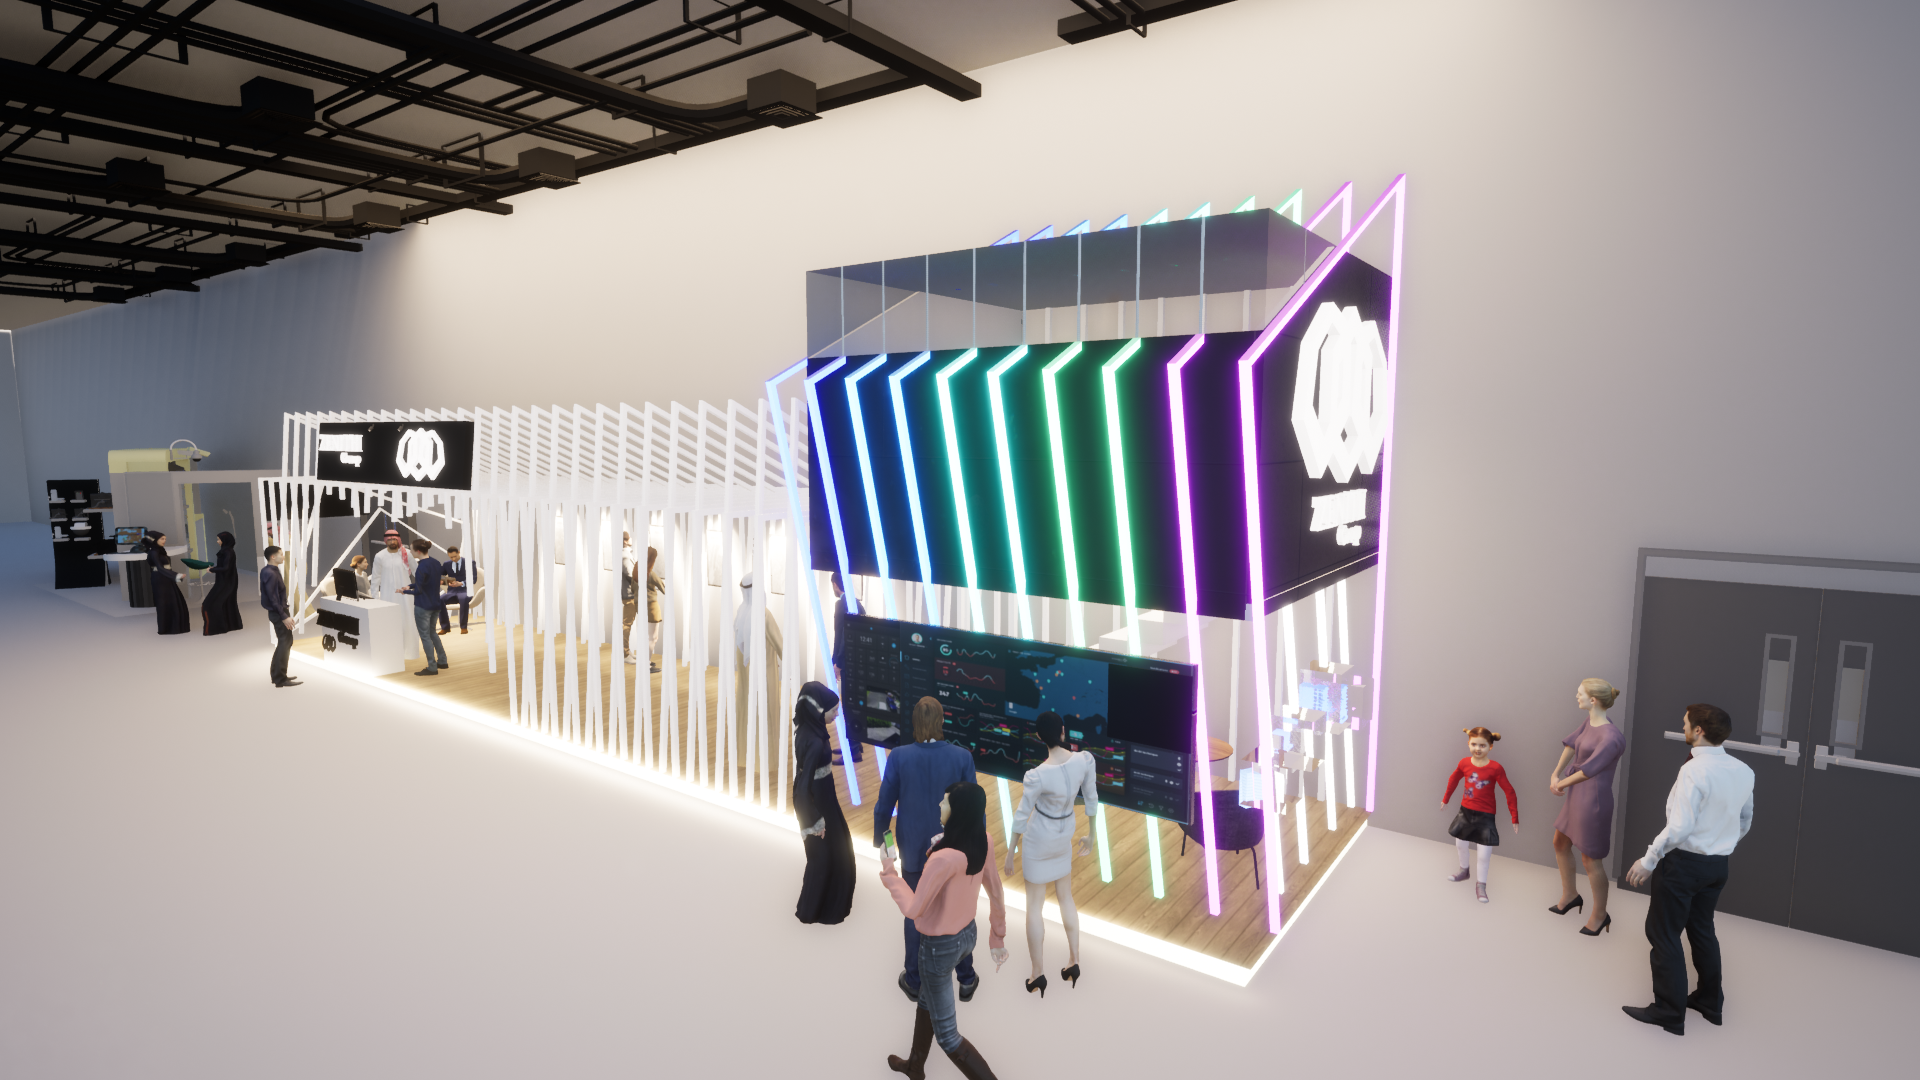 ZENITH Group Stand-Soodeh Abedini-Render (05)